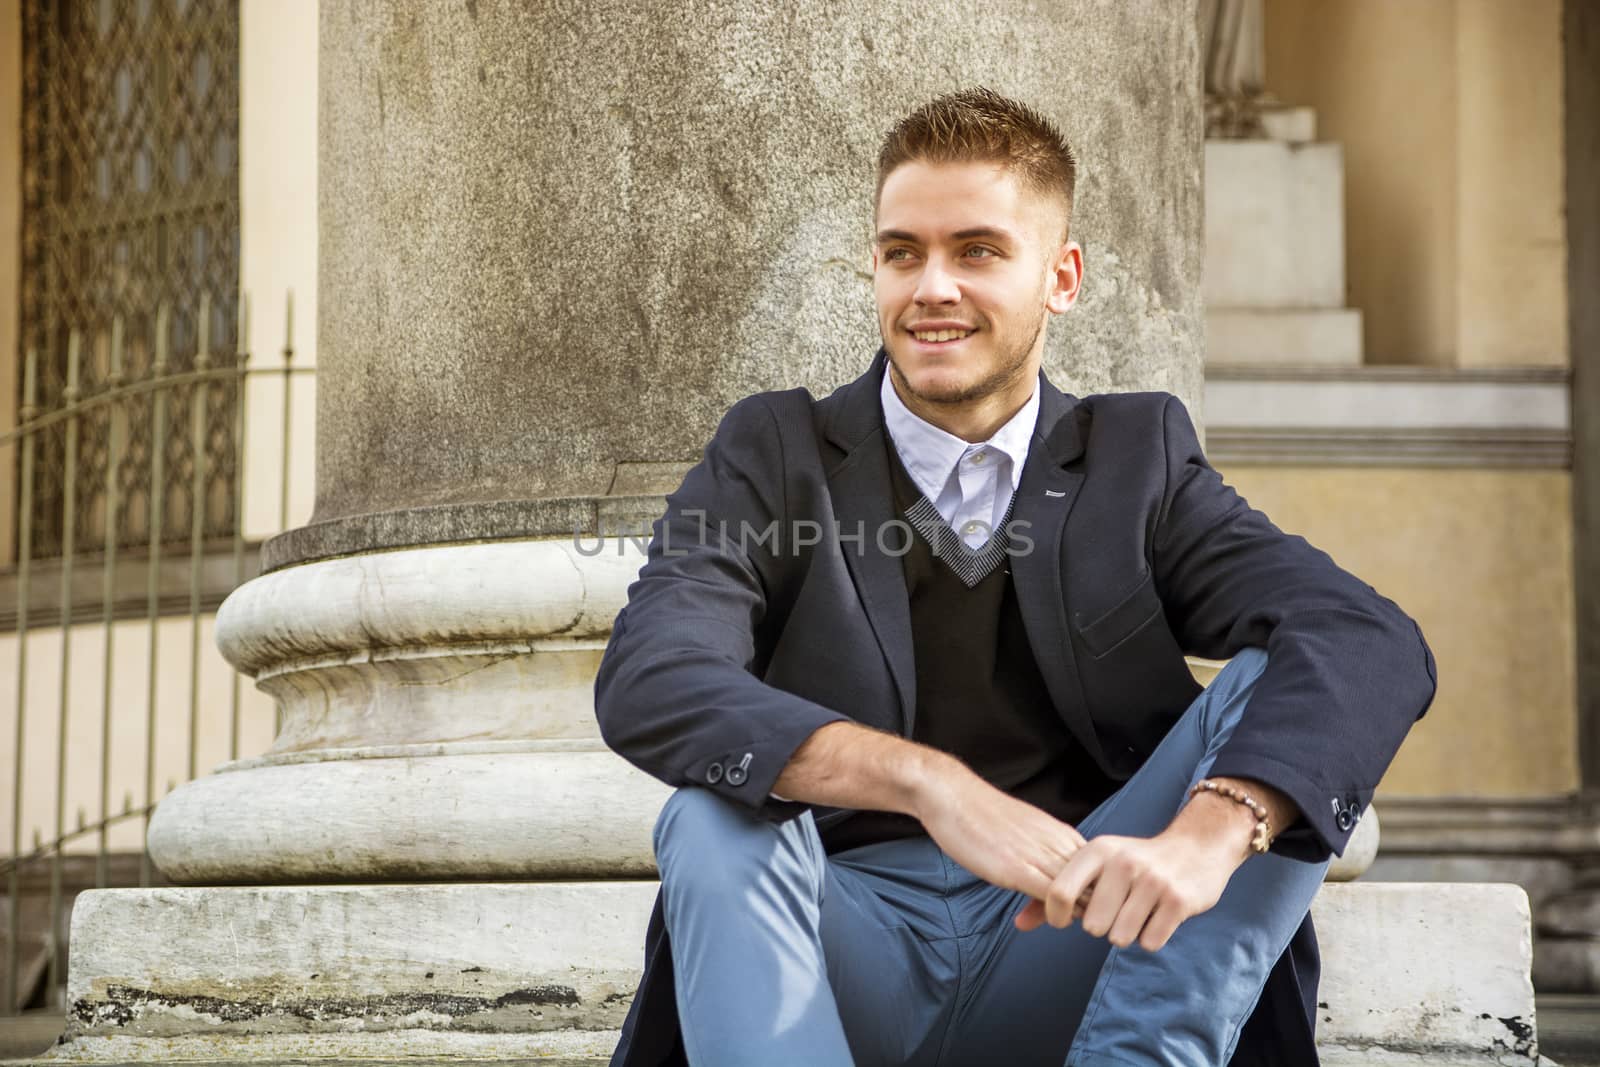 Handsome young man outdoor in jacket and shirt by artofphoto